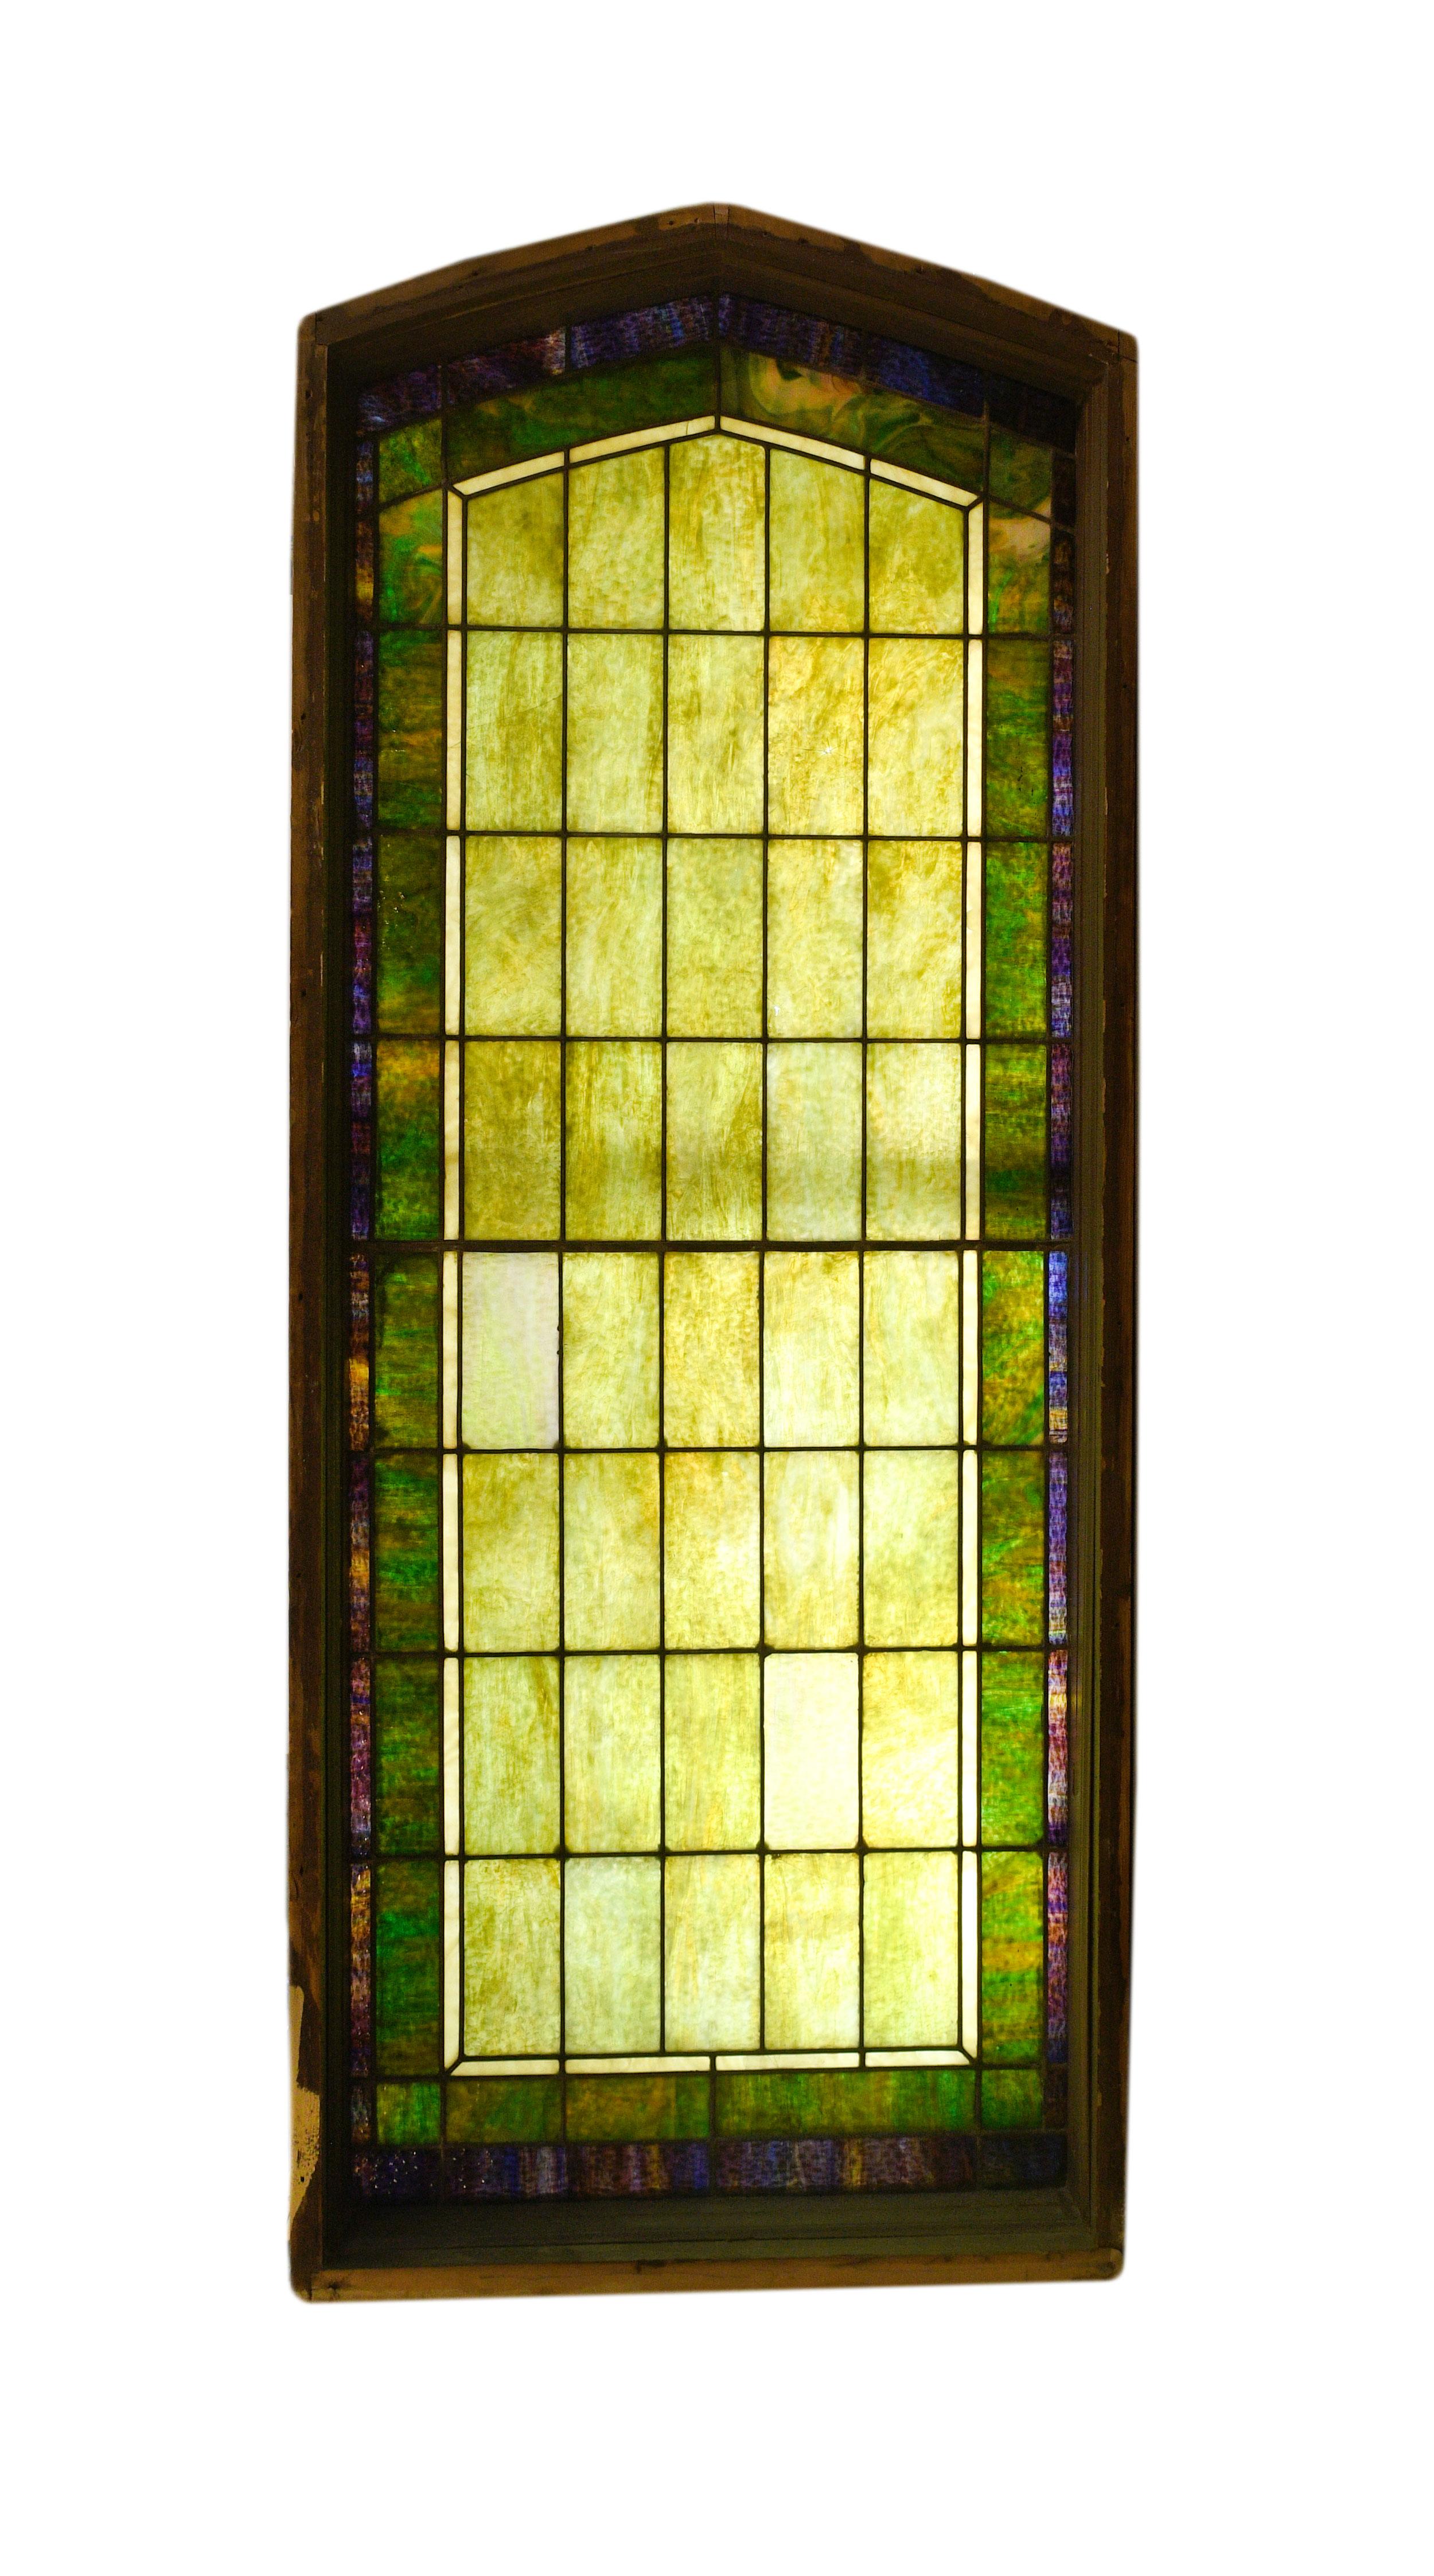 This large arched window is made of lovely purple and green slag glass and features a geometric design. When illuminated, the warmth of the colors on this window needs to be seen to believe!